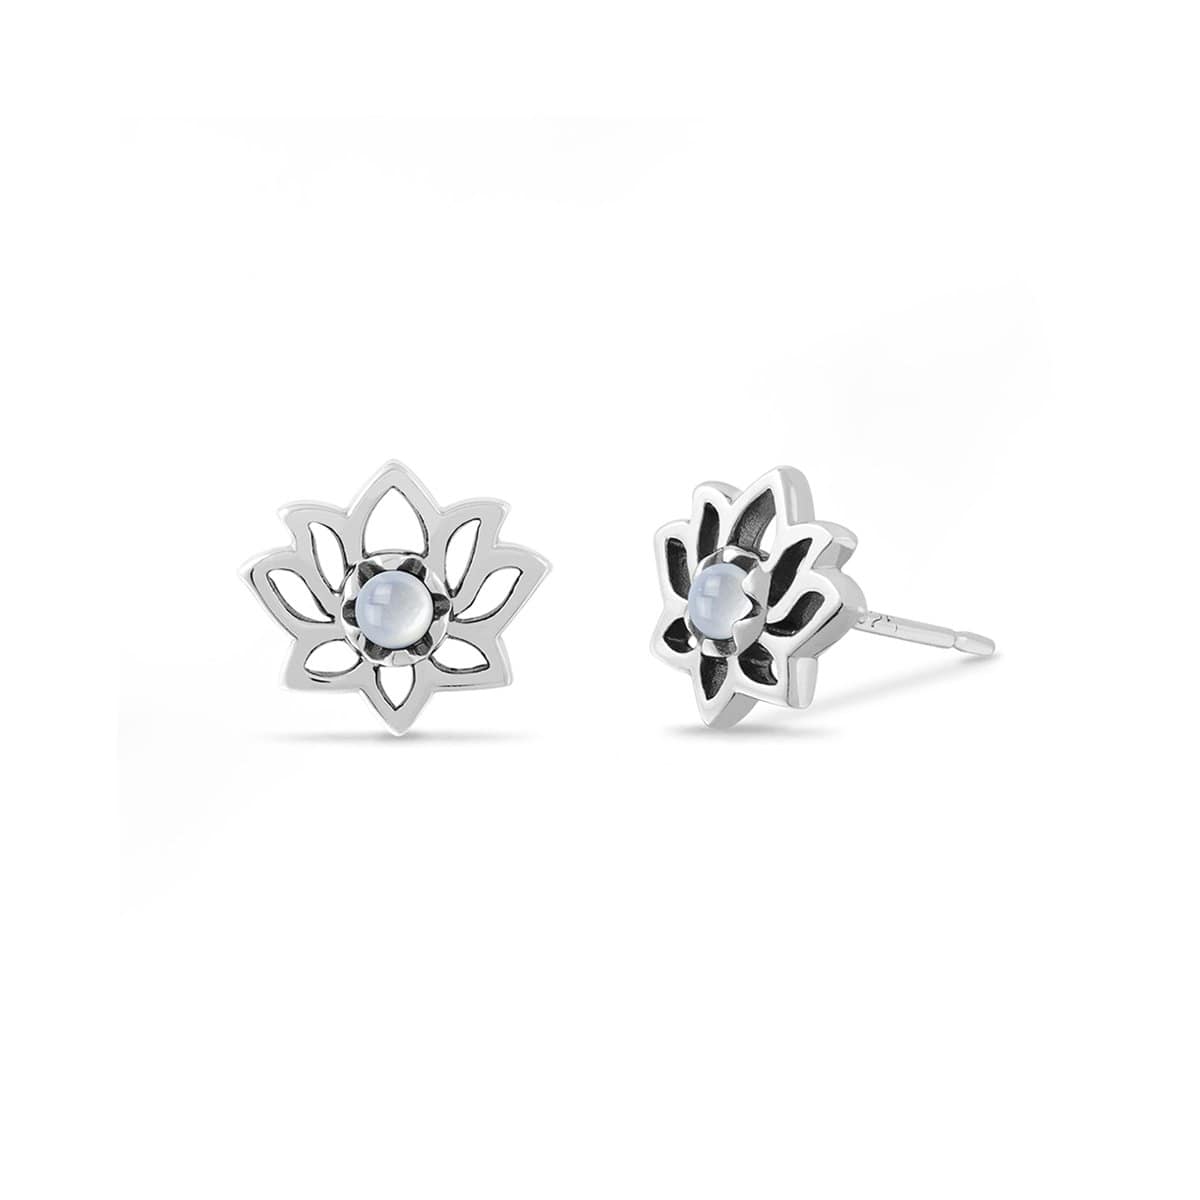 Boma Jewelry Earrings Sterling Silver with Mother of pearl Lotus Studs with Stone